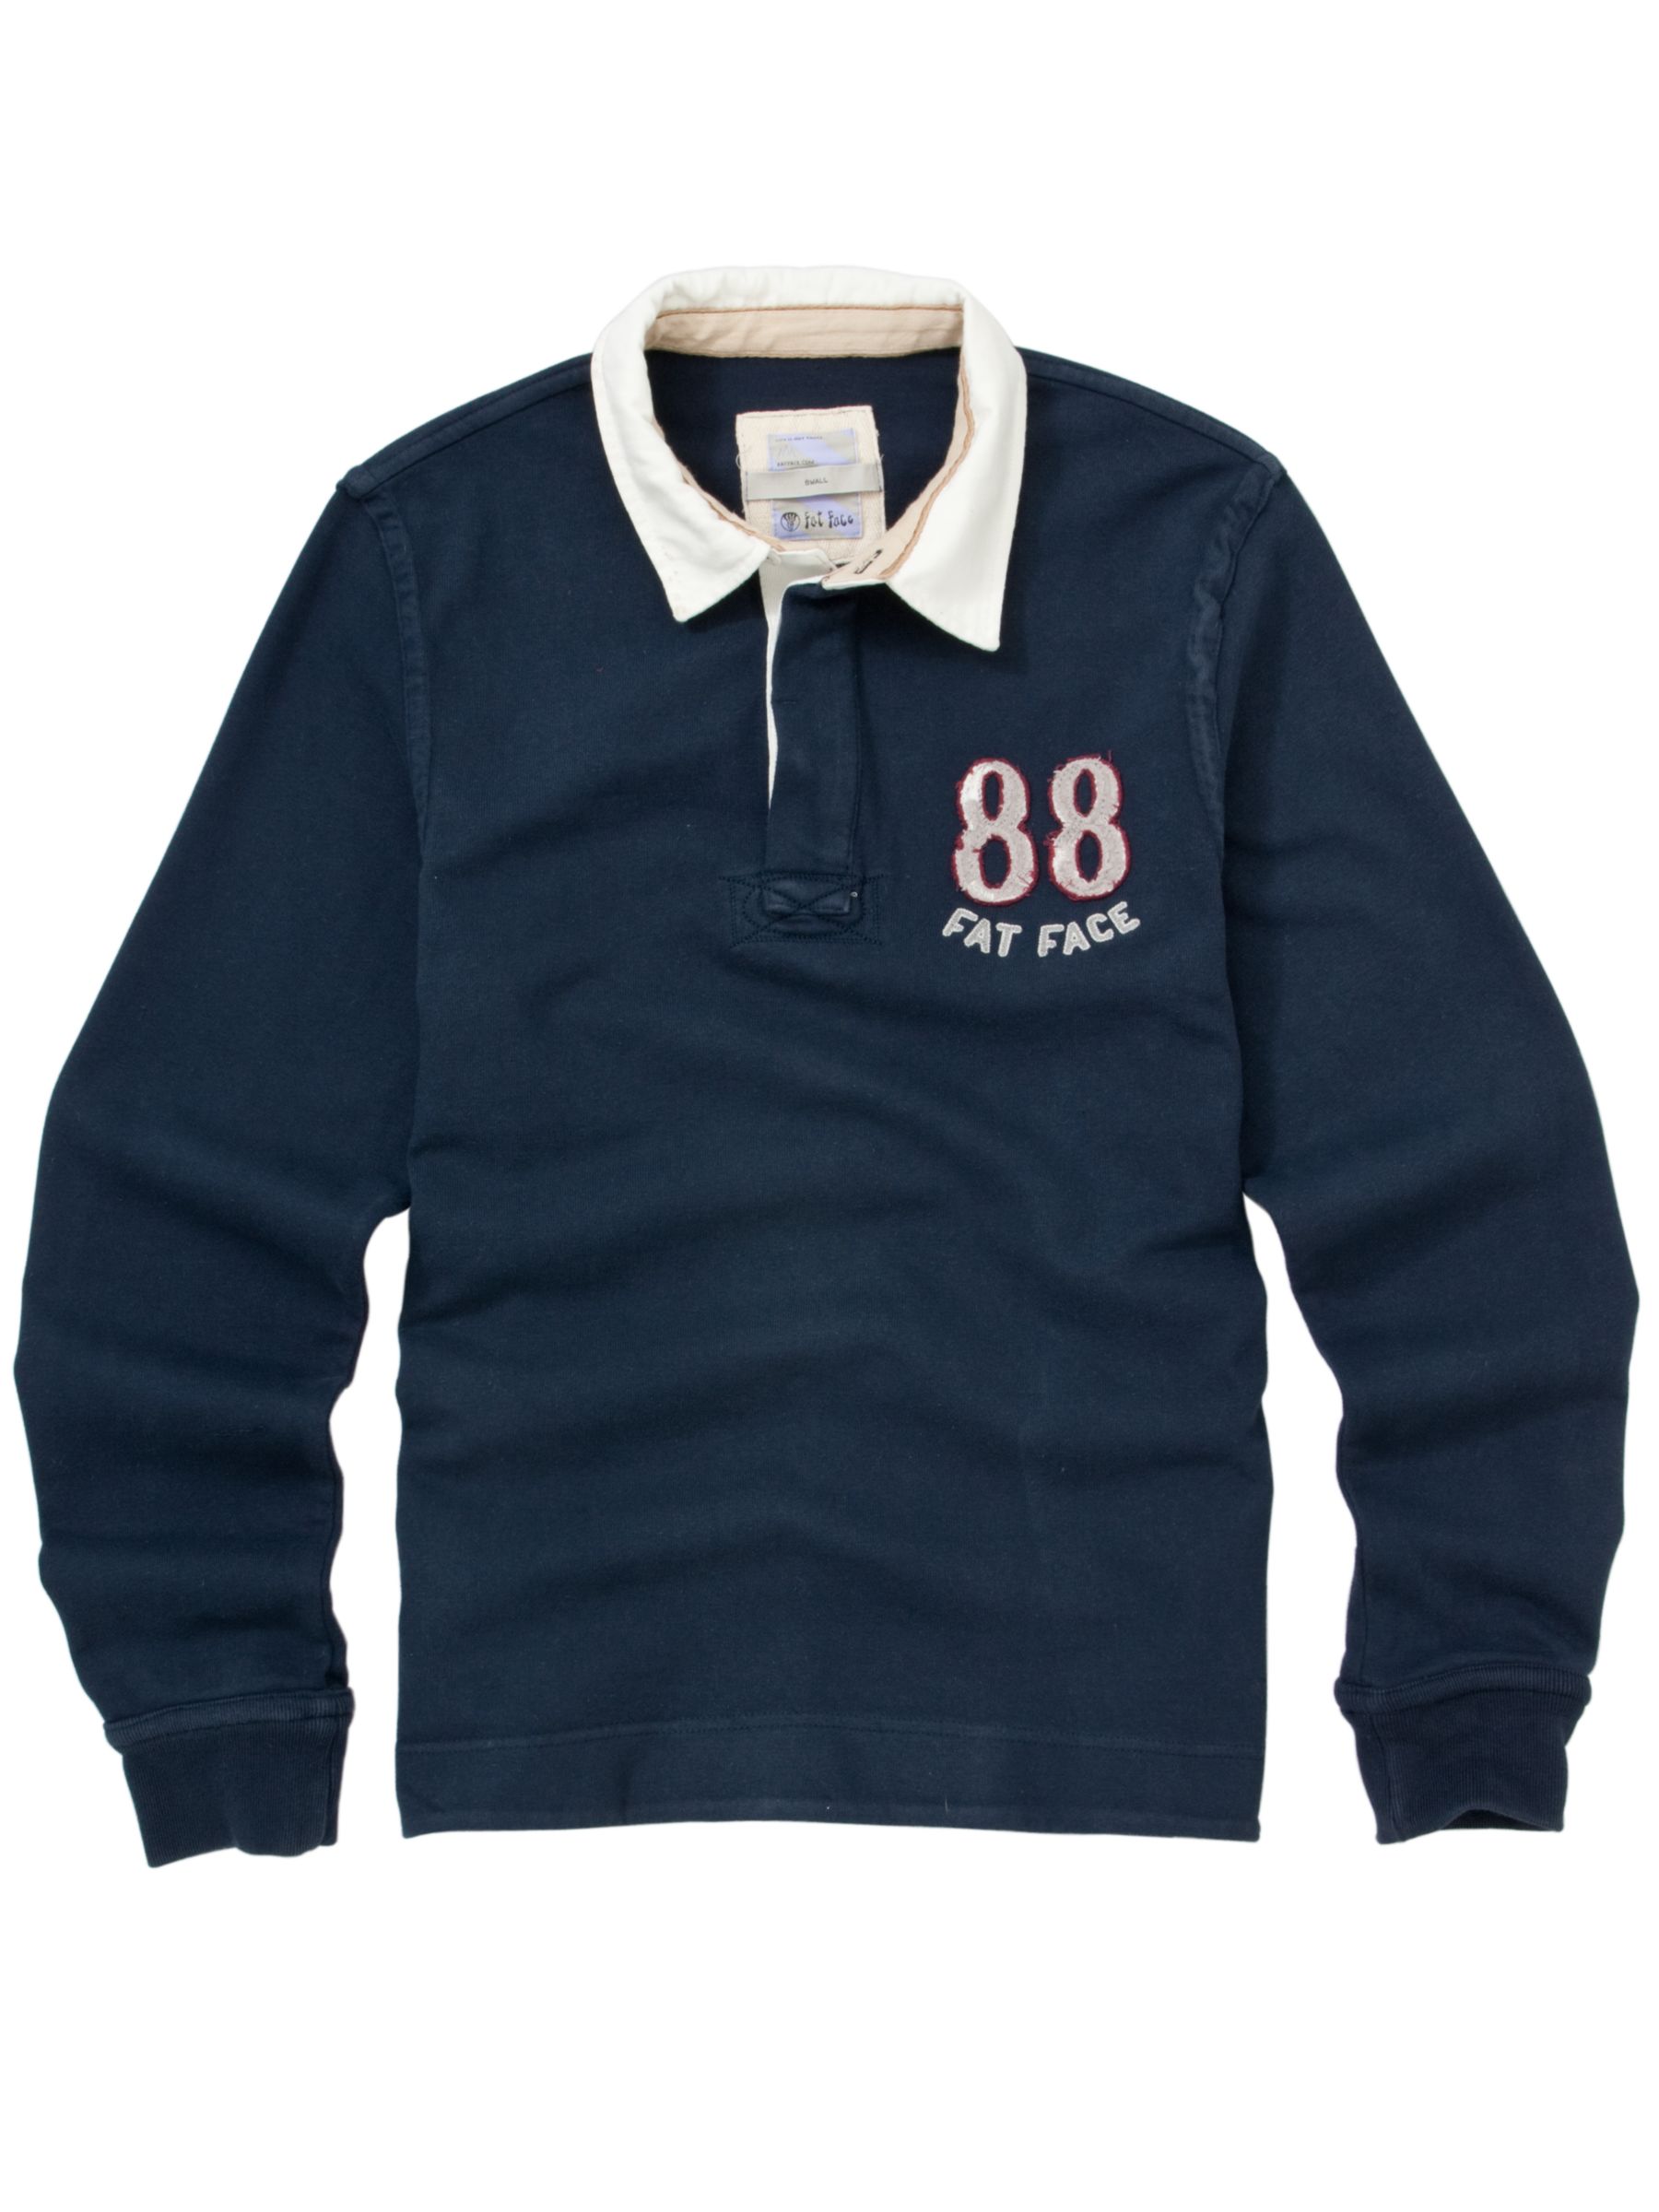 Classic Rugby Shirt, Navy